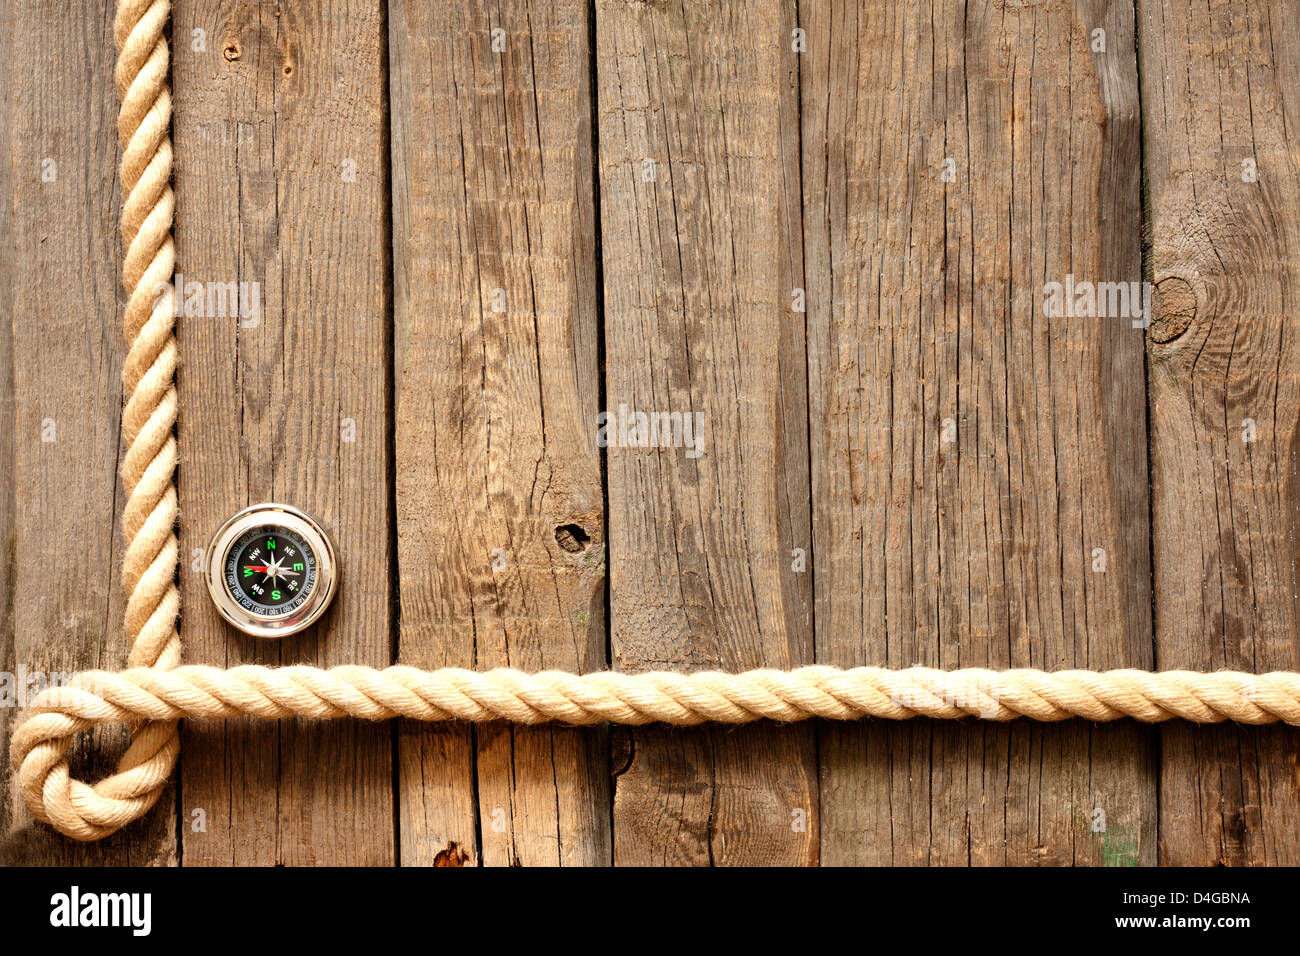 Old wooden planks and rope with compass vintage background Stock Photo